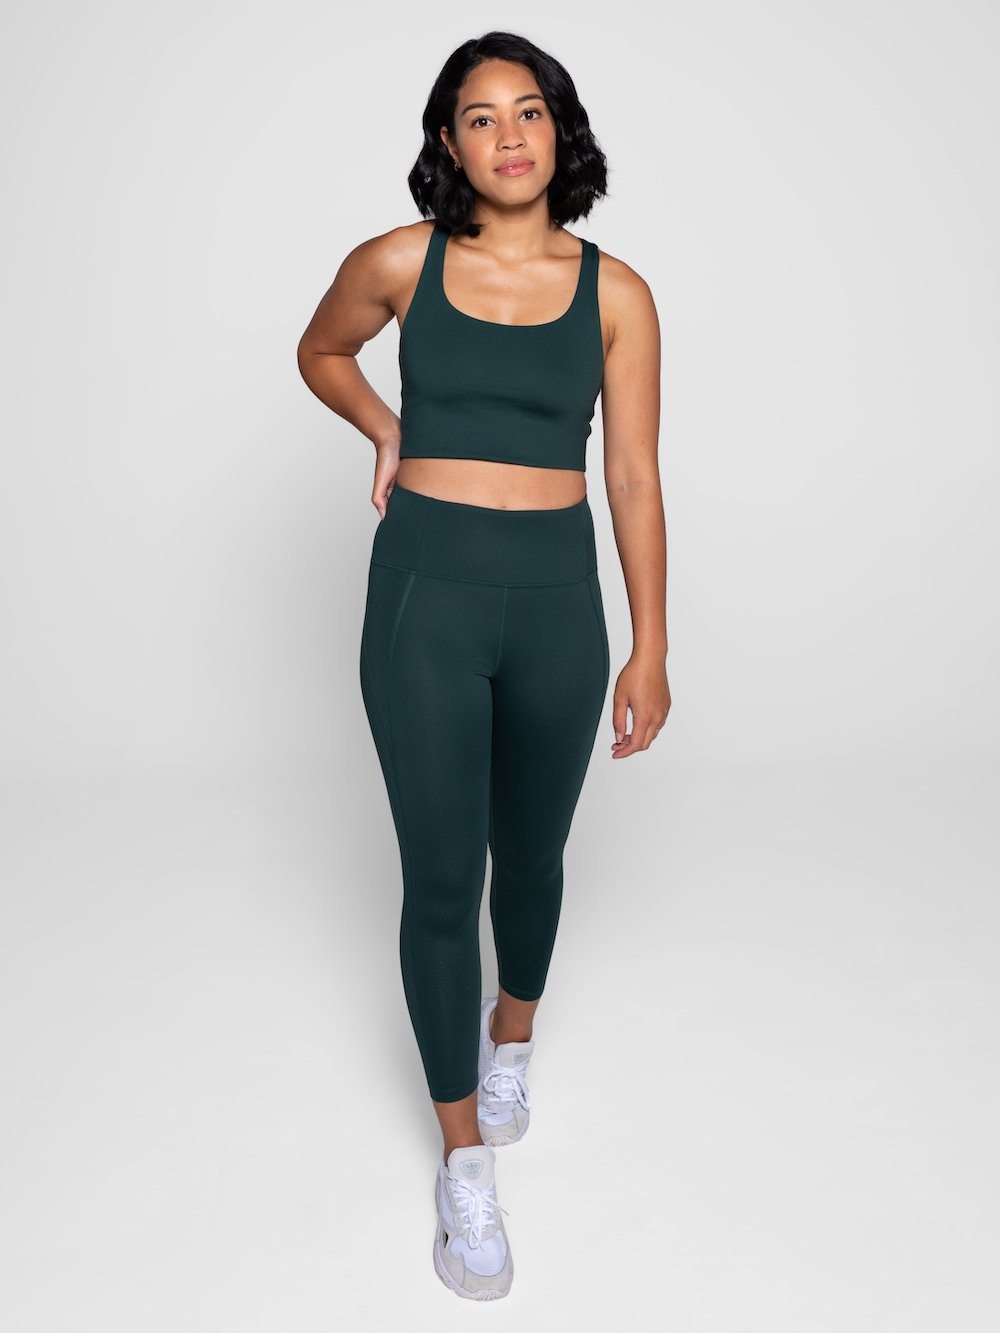 Girlfriend Collective Women's Compressive Legging - 7/8 - Made From  Recycled Plastic Bottles – Weekendbee - sustainable sportswear